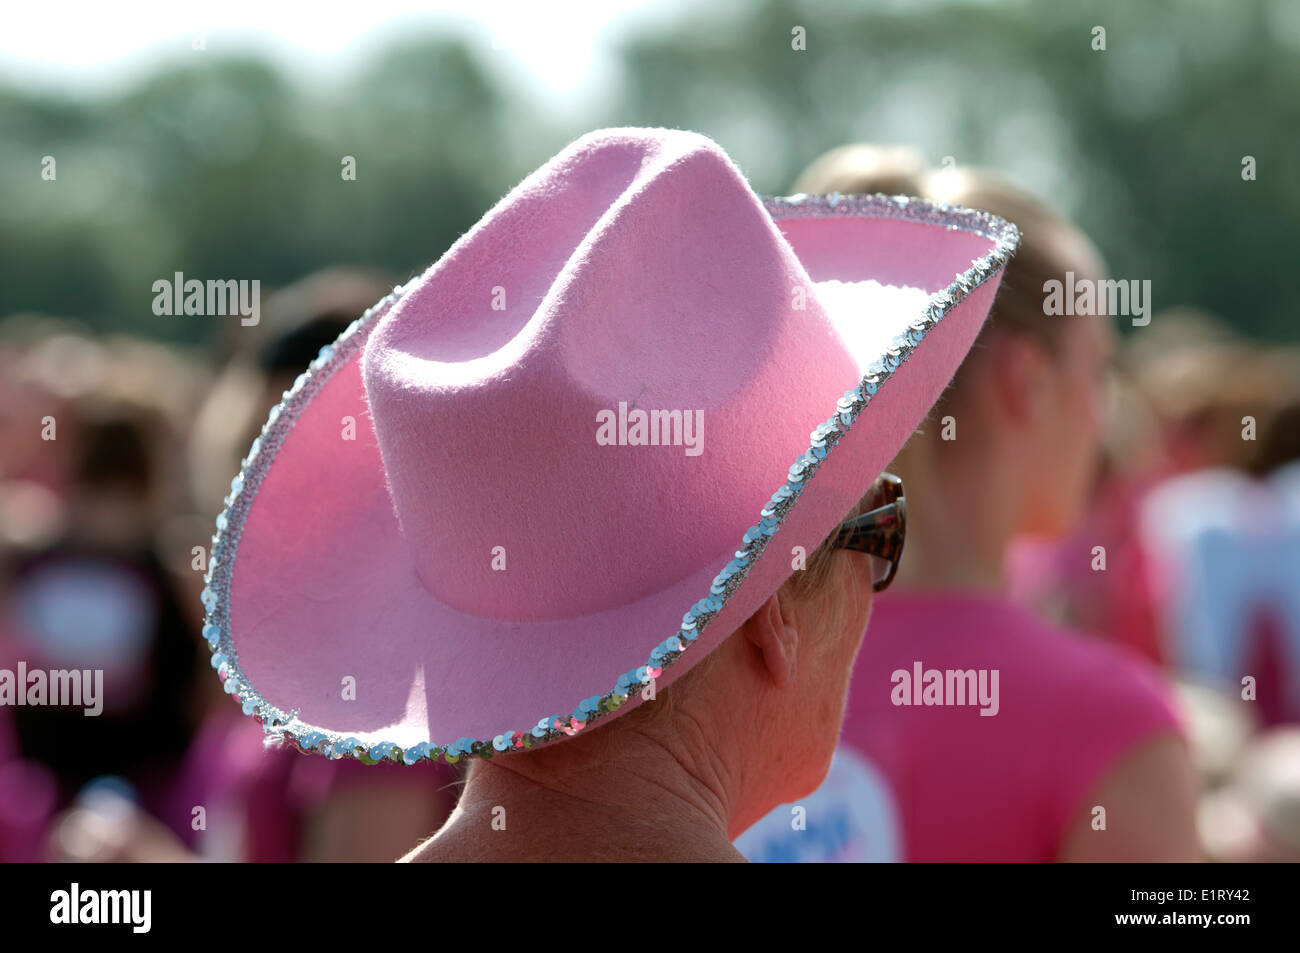 Race for Life, Cancer Research UK charity event, woman wearing pink hat. Stock Photo